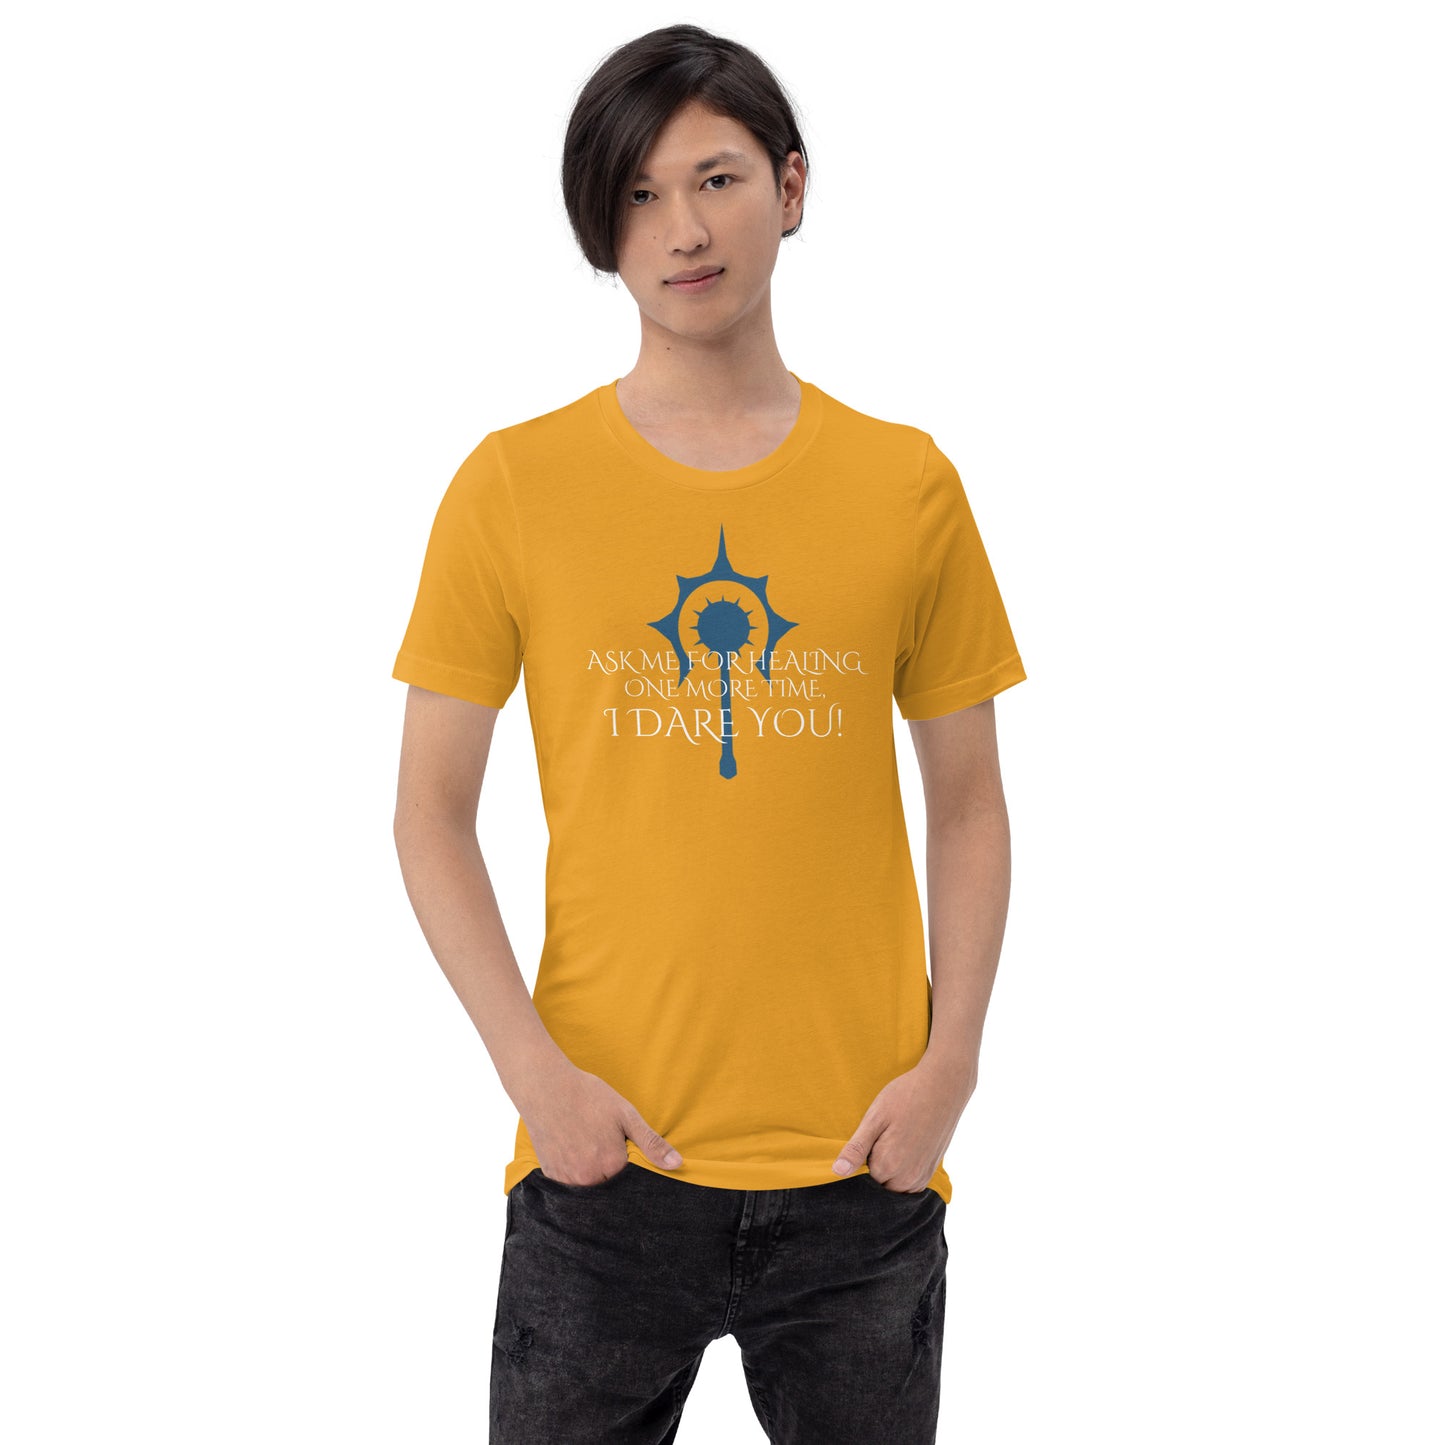 Ask me for healing one more time. Cleric D&D Shirt - Unisex t-shirt